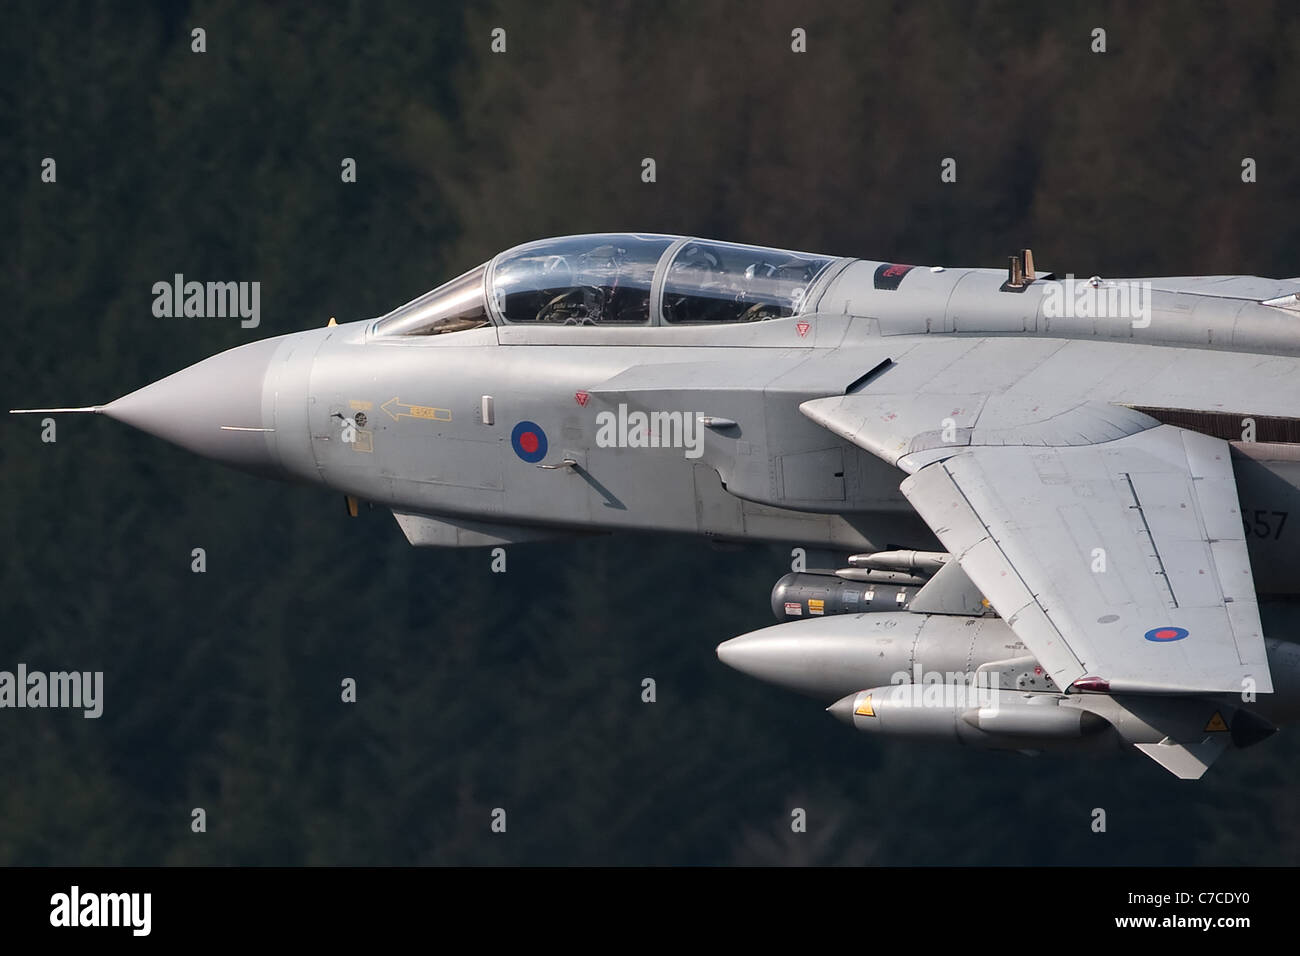 Panavia Tornado GR. 4 flying at low level in mid Wales shot from the hill side Stock Photo